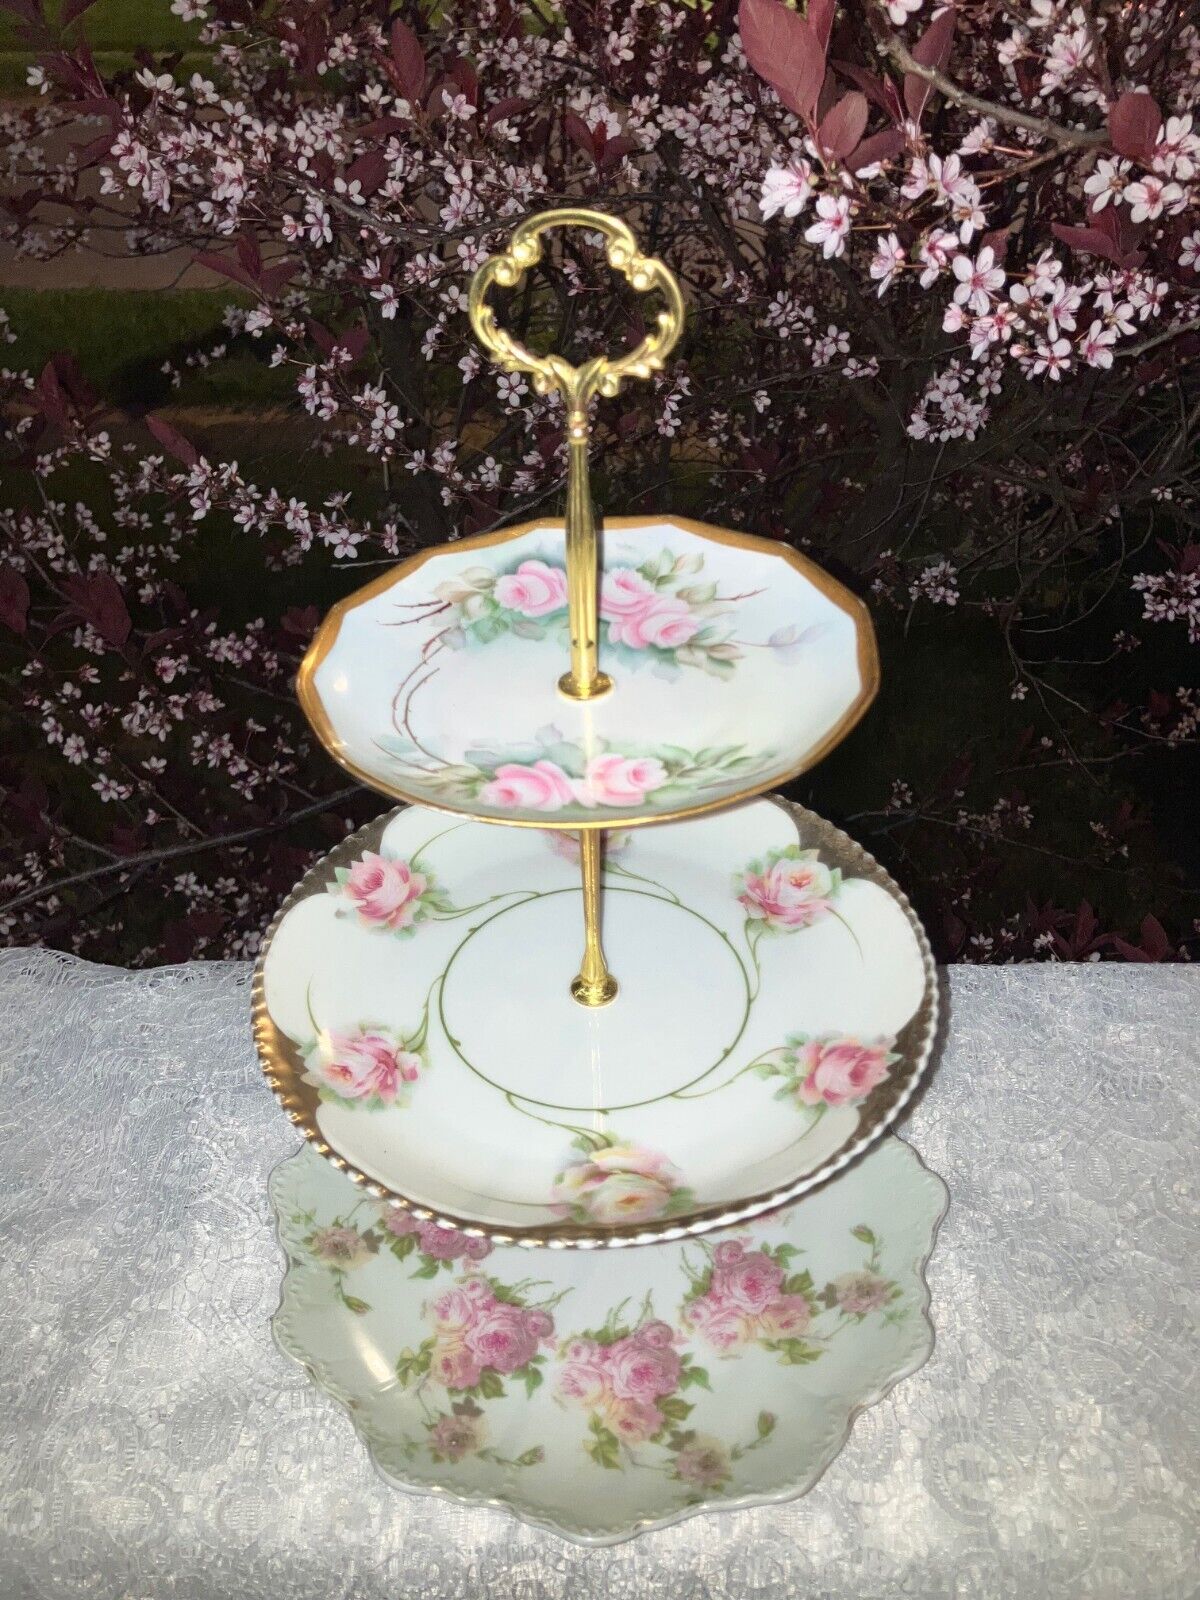 Rosenthal China / MZ Austria 3 Tier Tray Made from Antique Plates